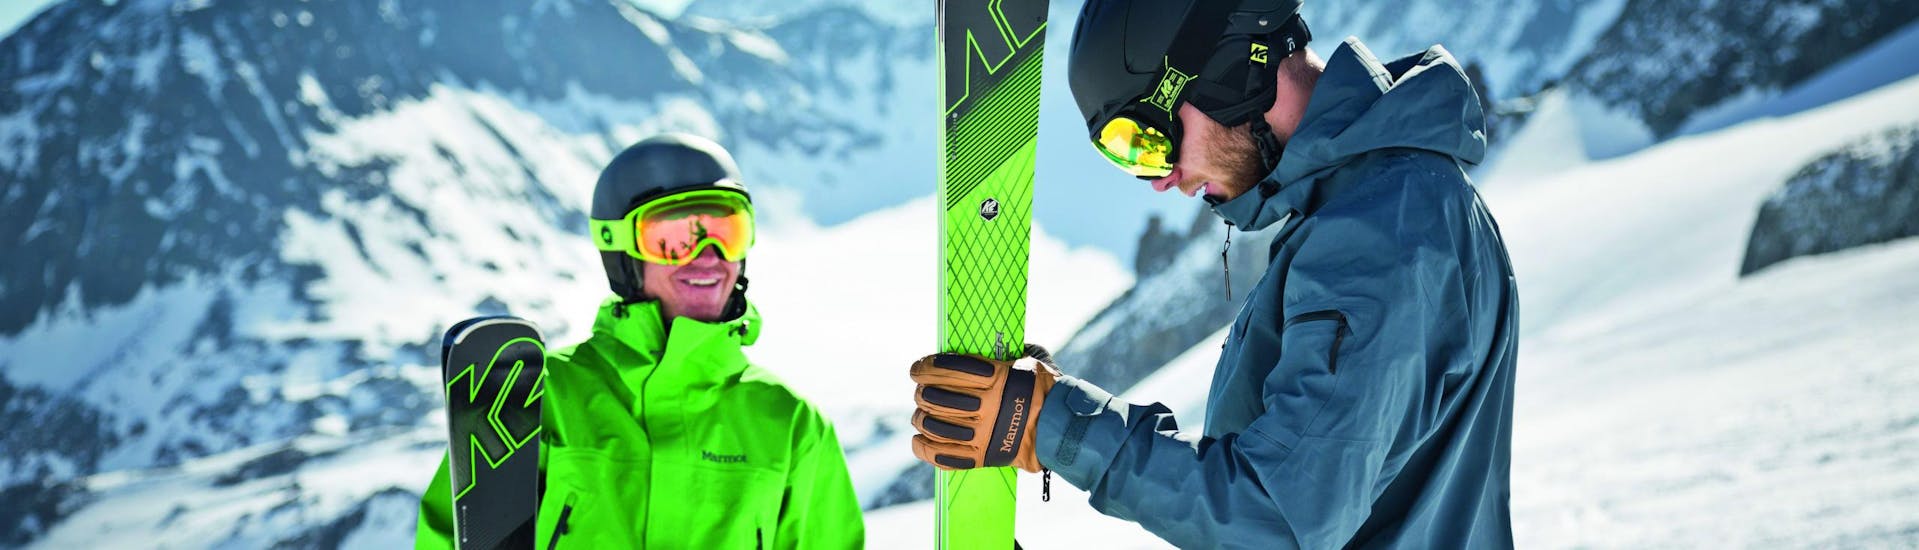 Private Ski Lessons for Adults "Crash Course" for All Levels from Skischule Snow Academy Monika Berwein.